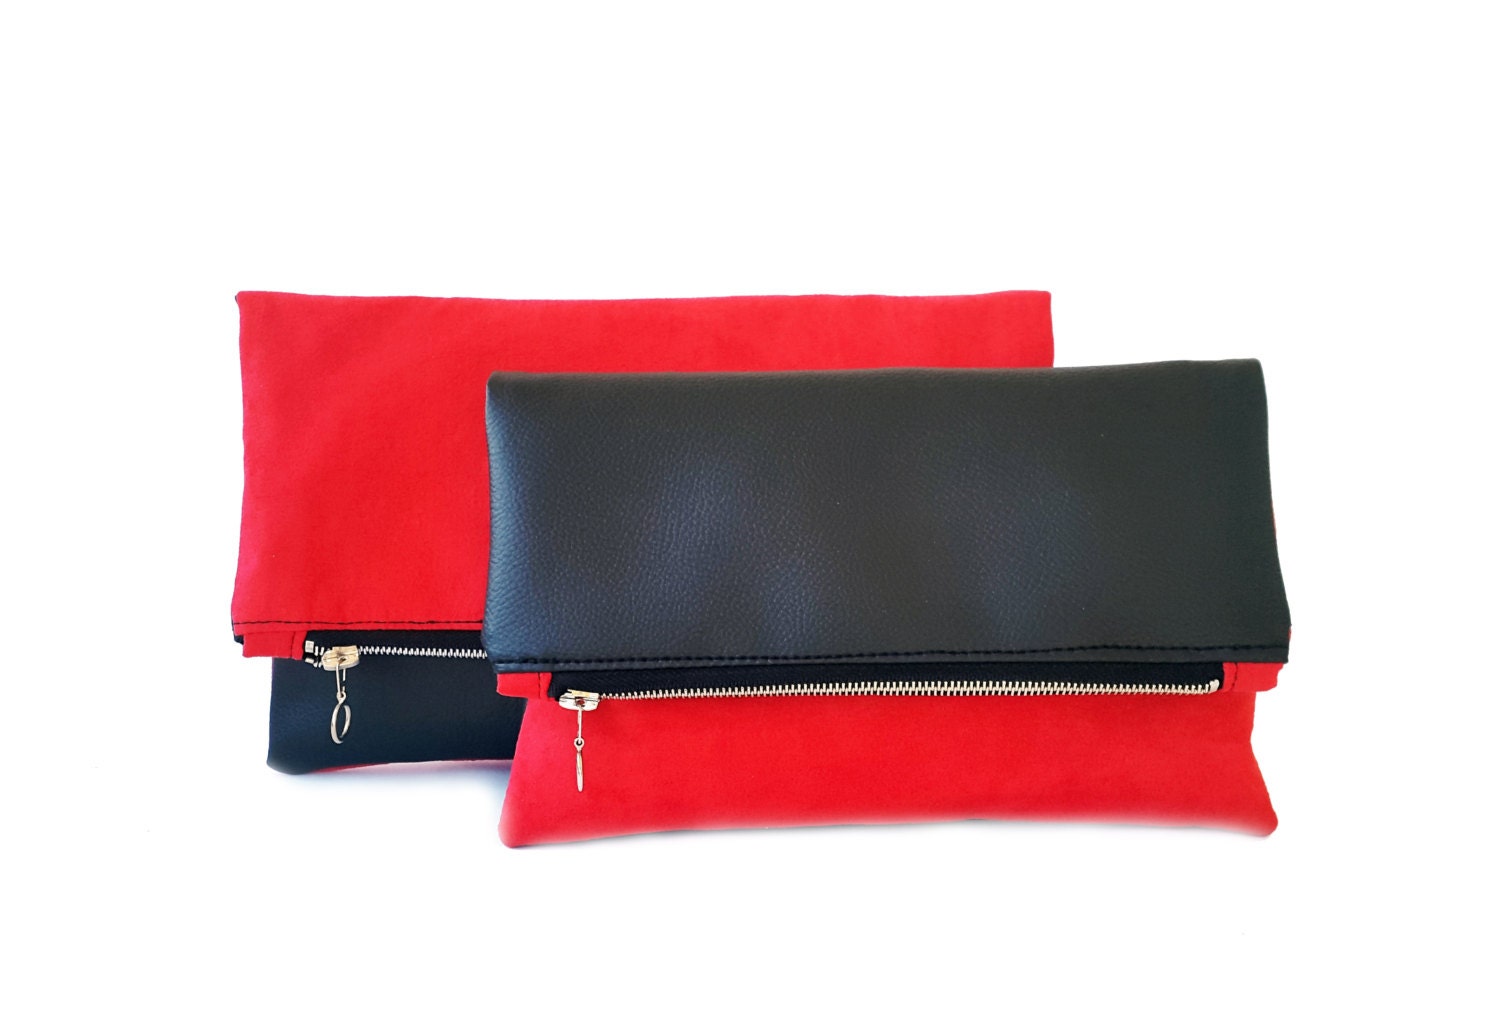 Popular items for black clutch on Etsy  